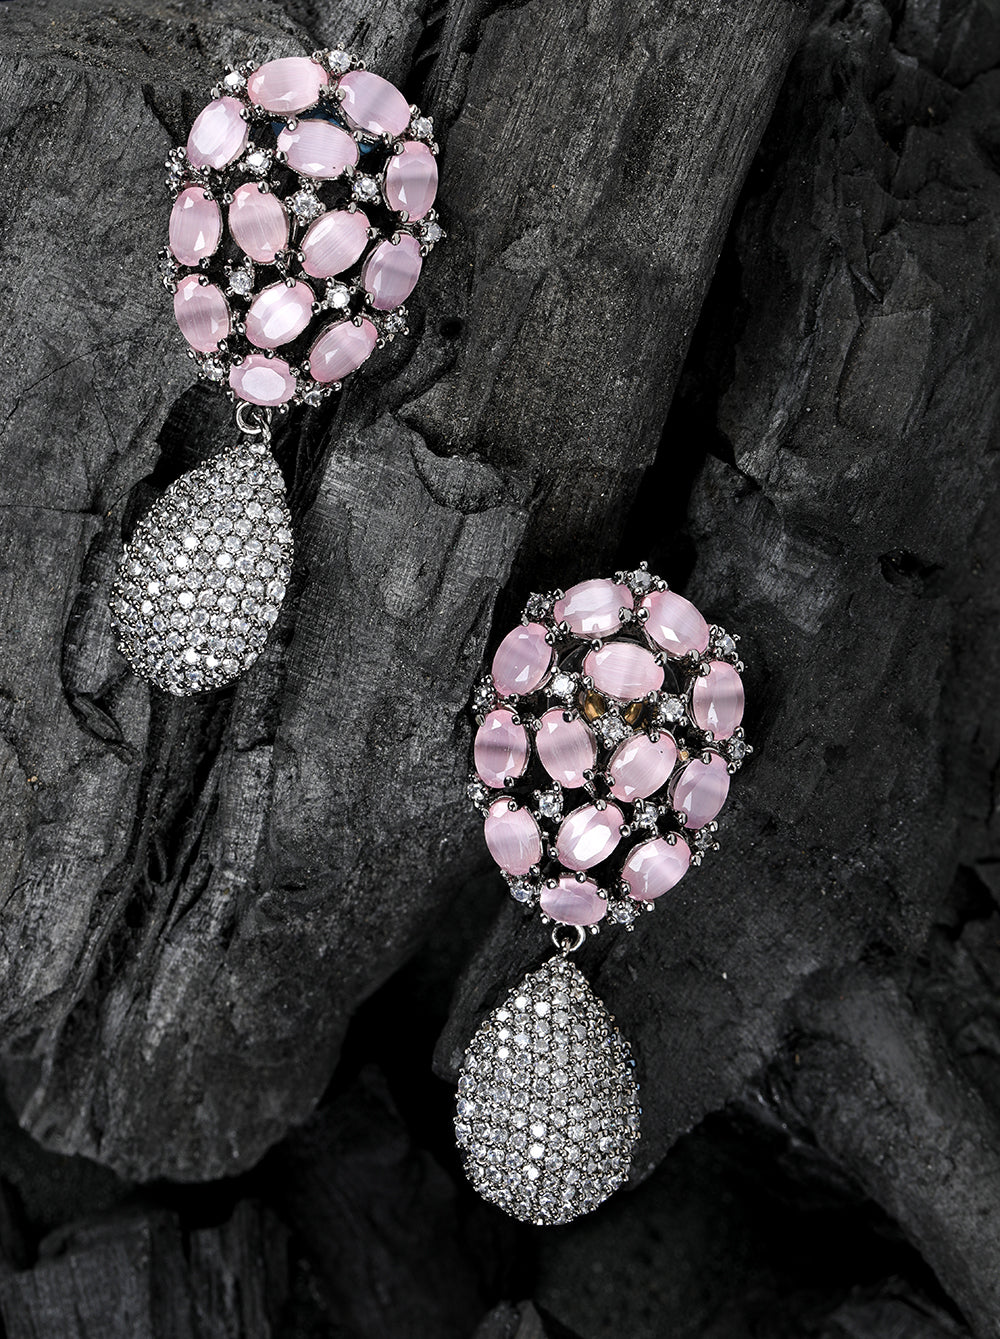 Silver-Plated Artificial Stone Studded Drop earrings